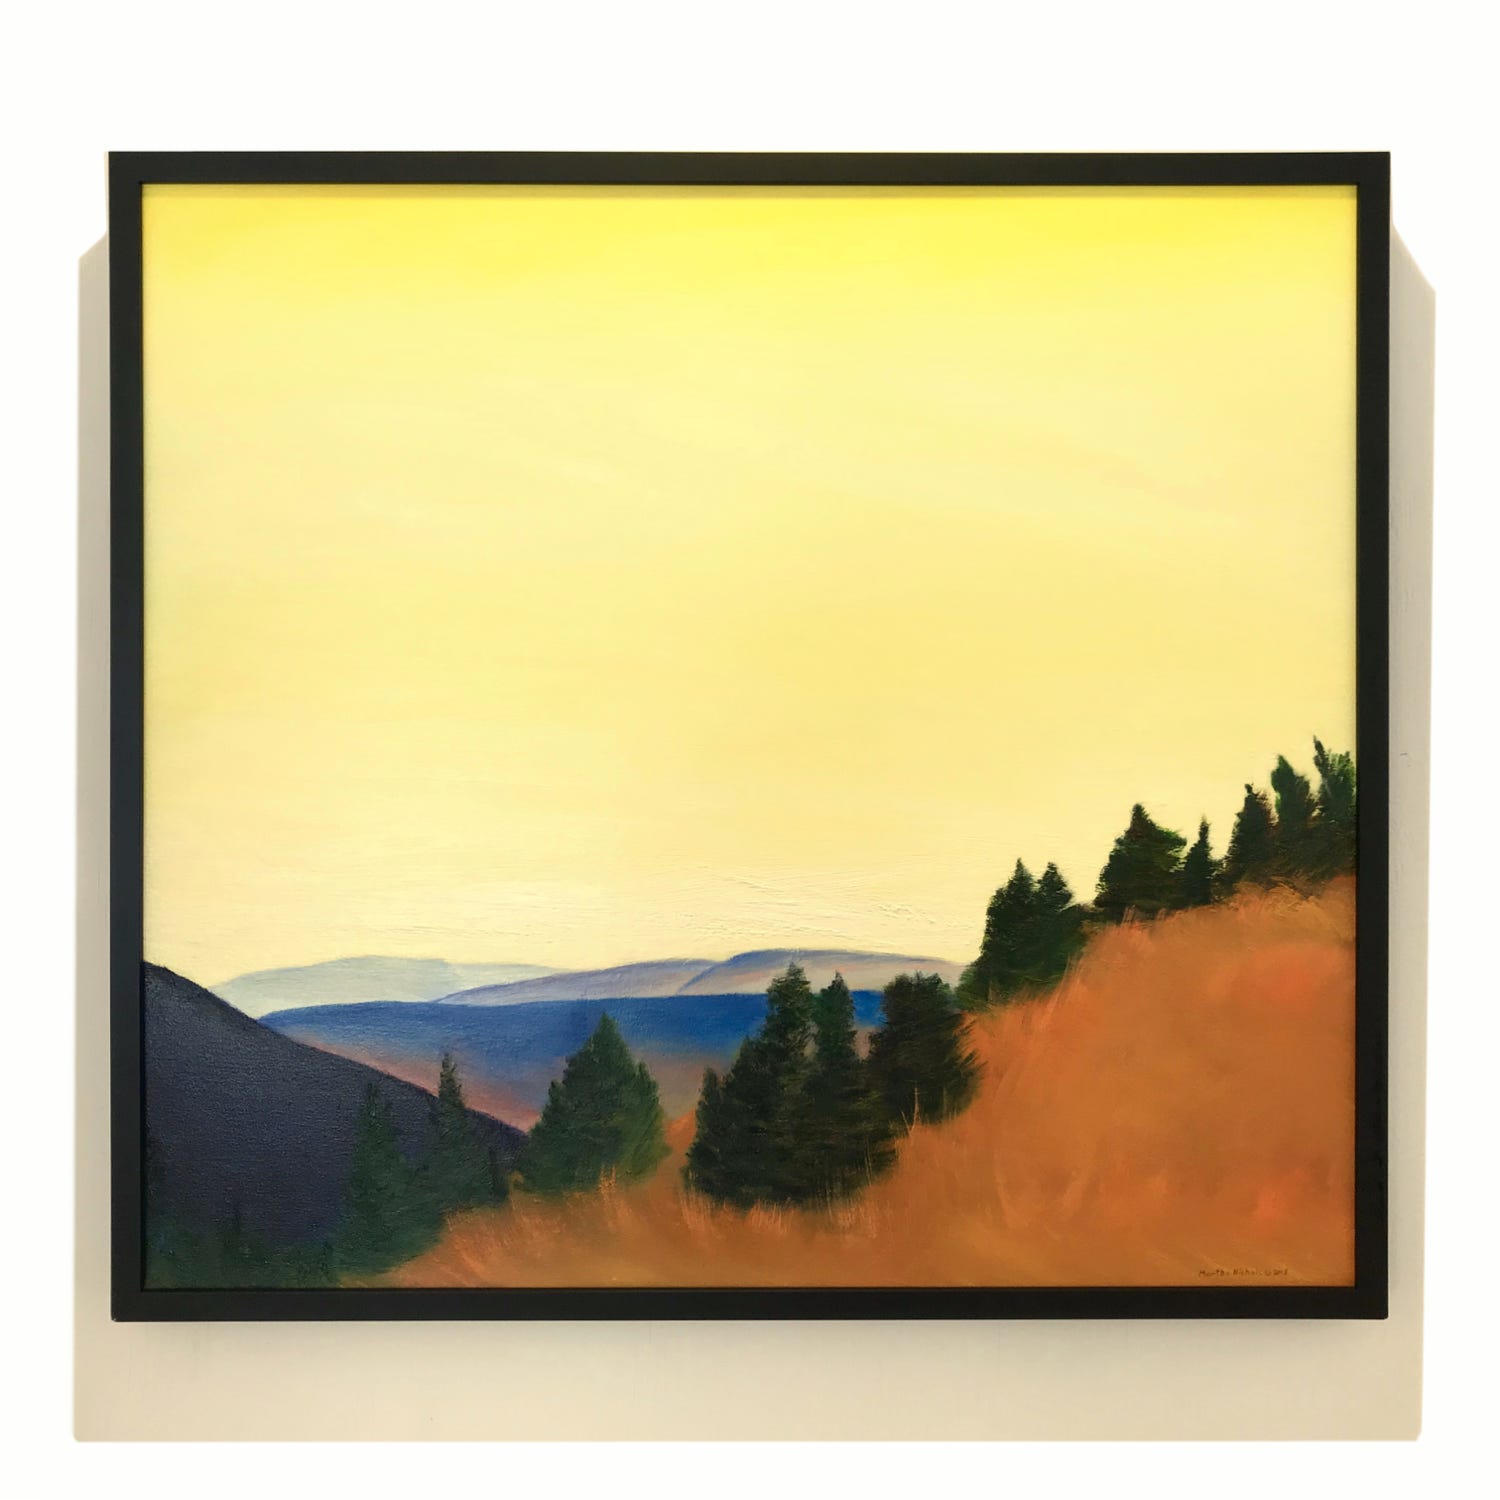 martha-nichols_bromley-mountain-vermont-in-the-fall-oil-on-canvas-37-x-42